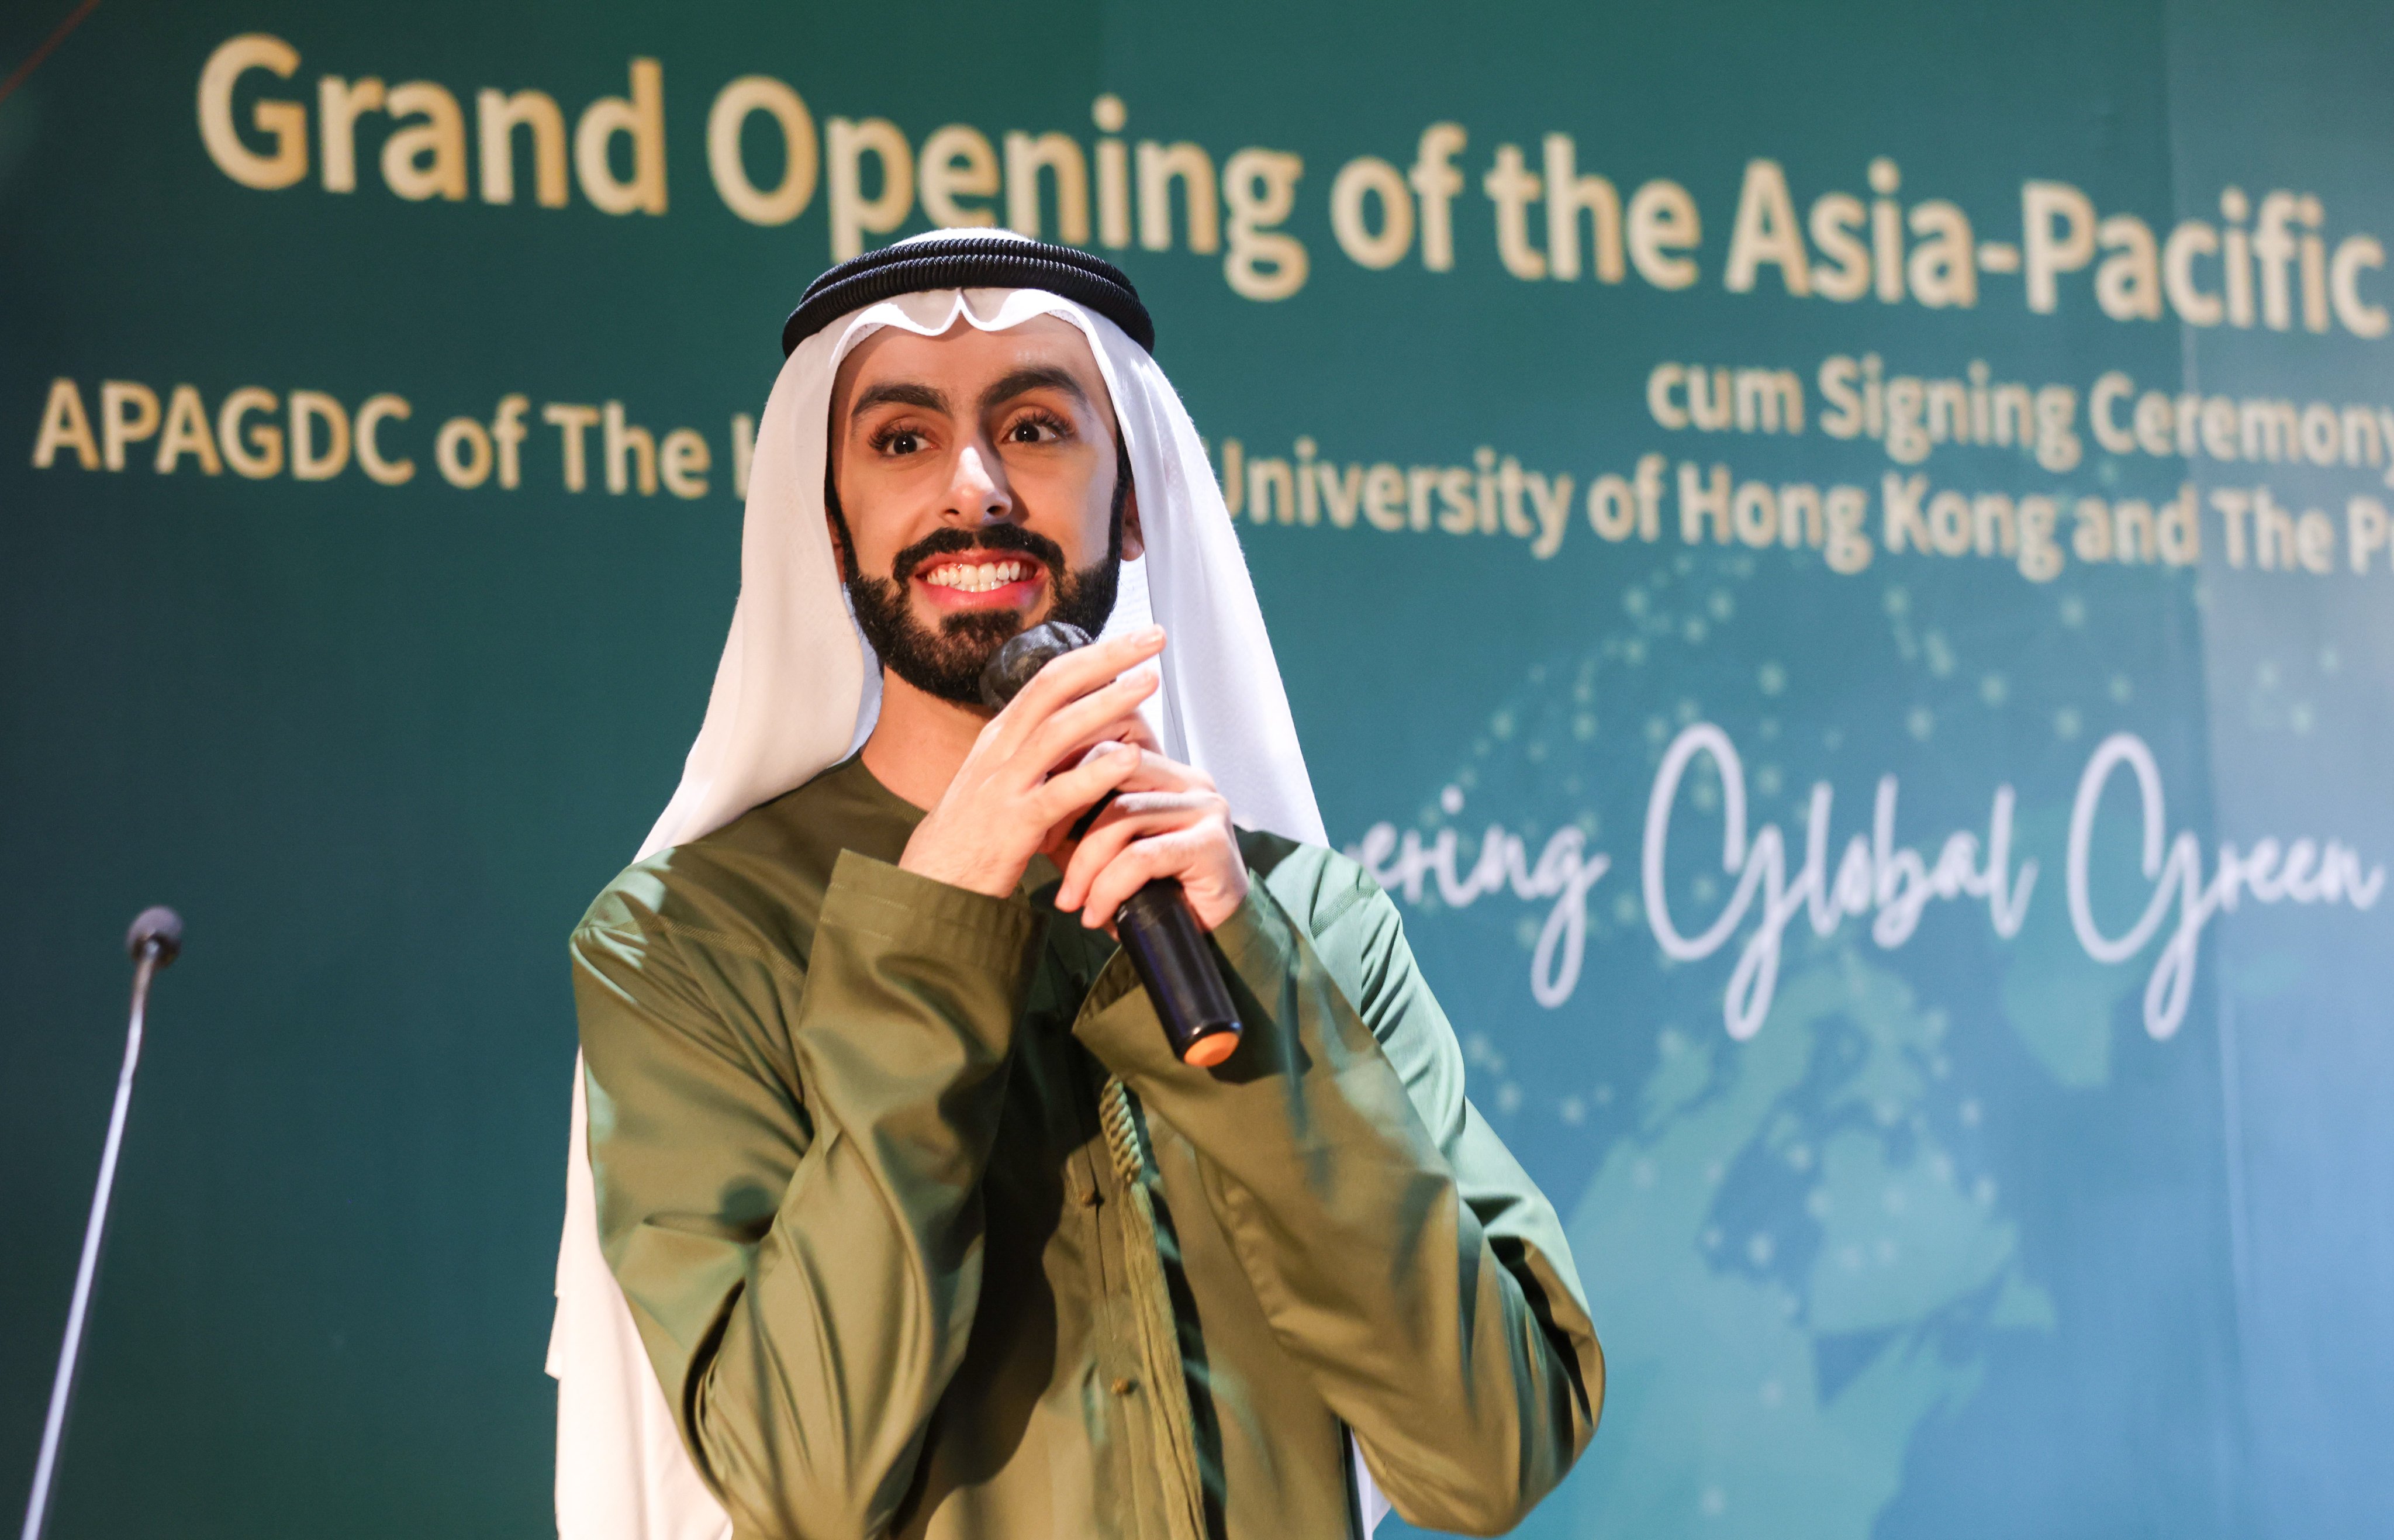 Sheikh Ali Al Maktoum, who pledged to open a US$500 million family office in Hong Kong, attends a media event at Hang Seng University in Sha Tin on March 26. Photo: Yik Yeung-man